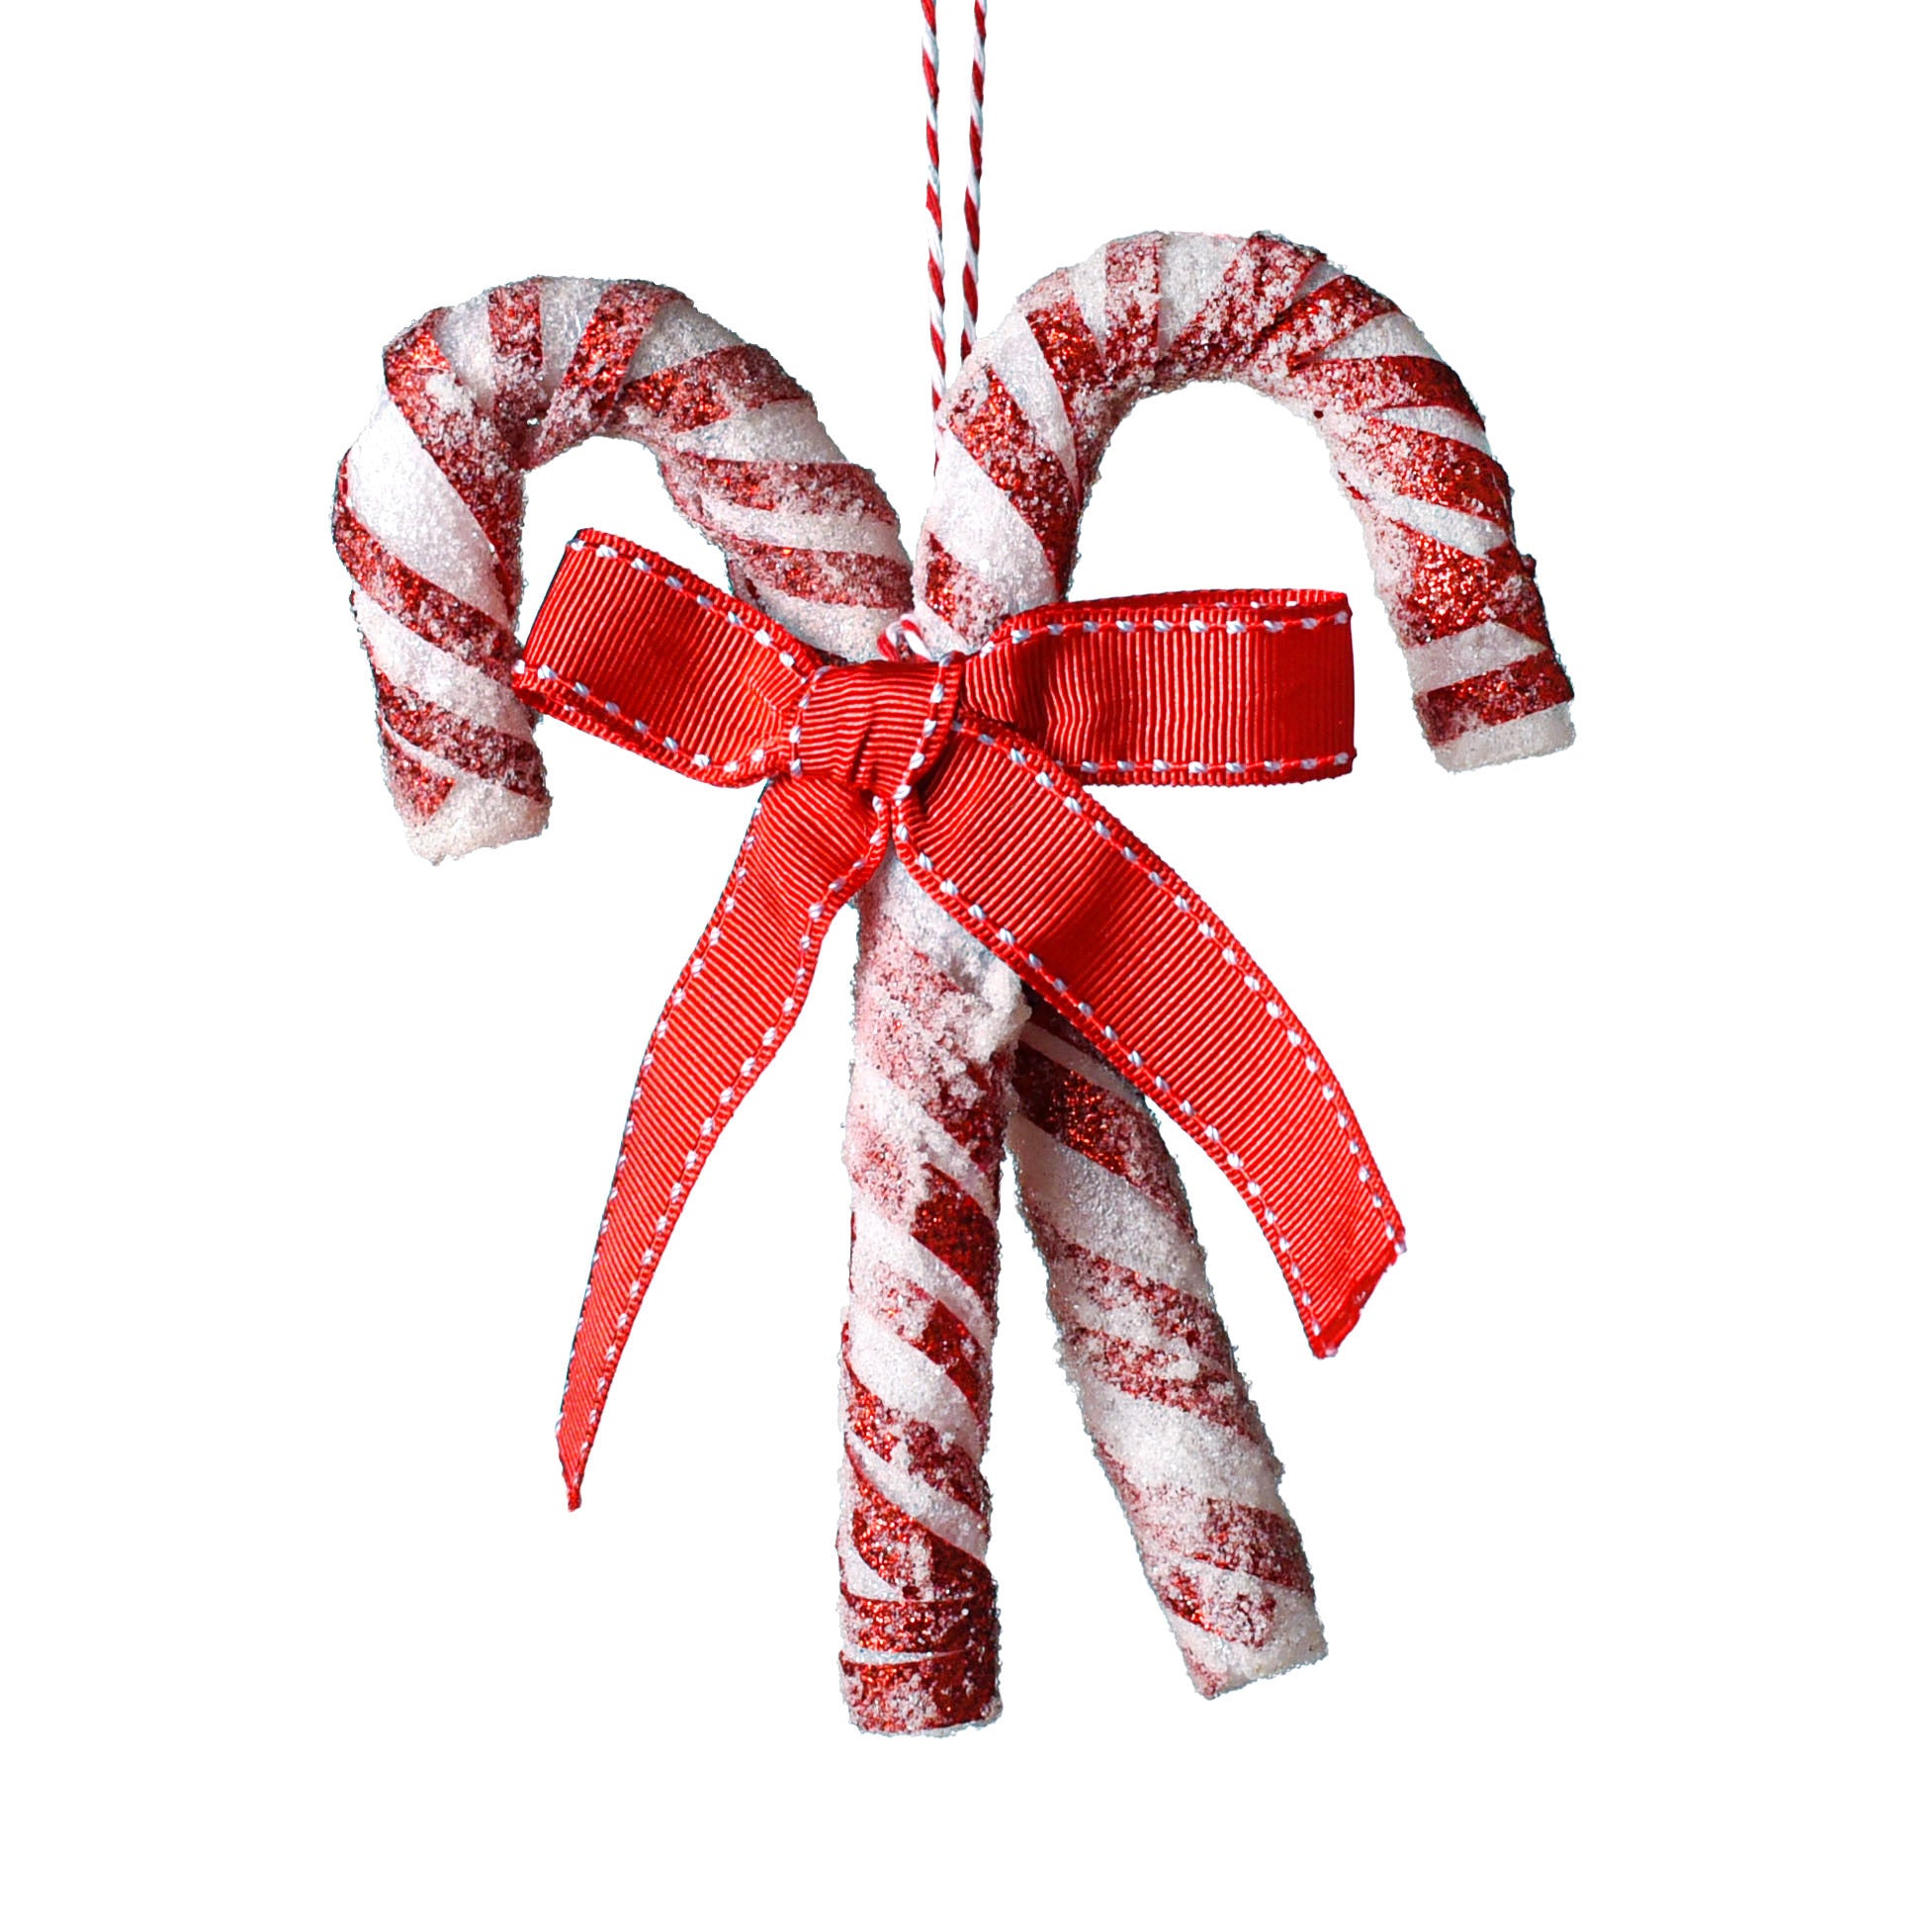 6" Peppermint Candy Canes Ornament